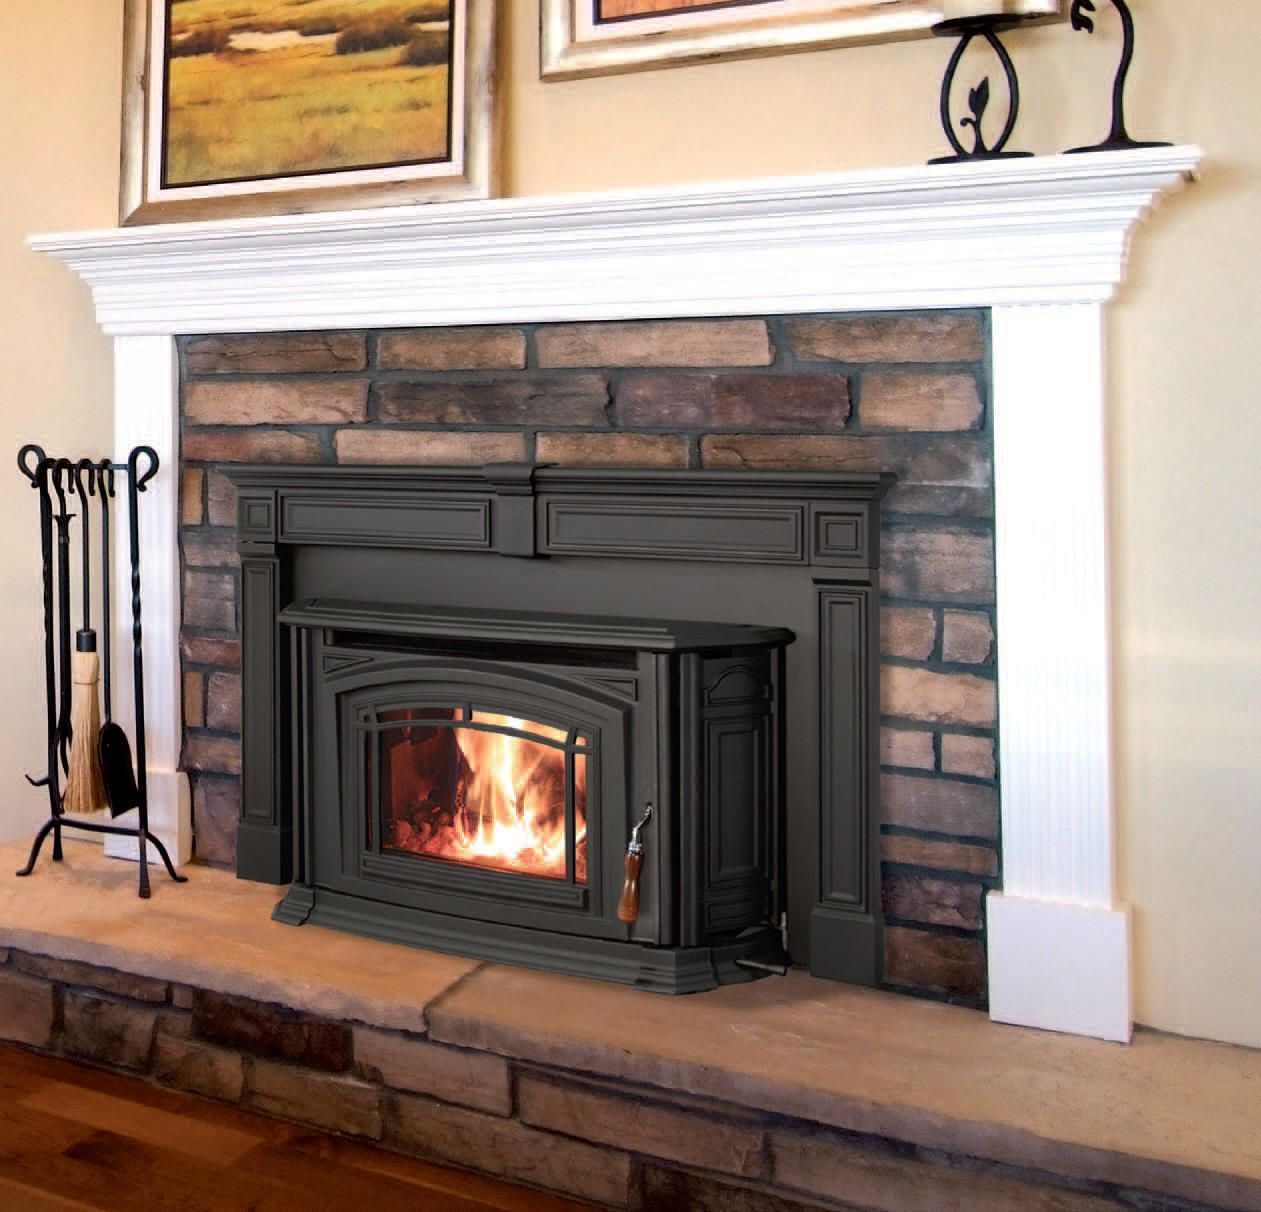 Are Fireplace Inserts Worth It Luxury I Like This Pellet Stove with A Mantel